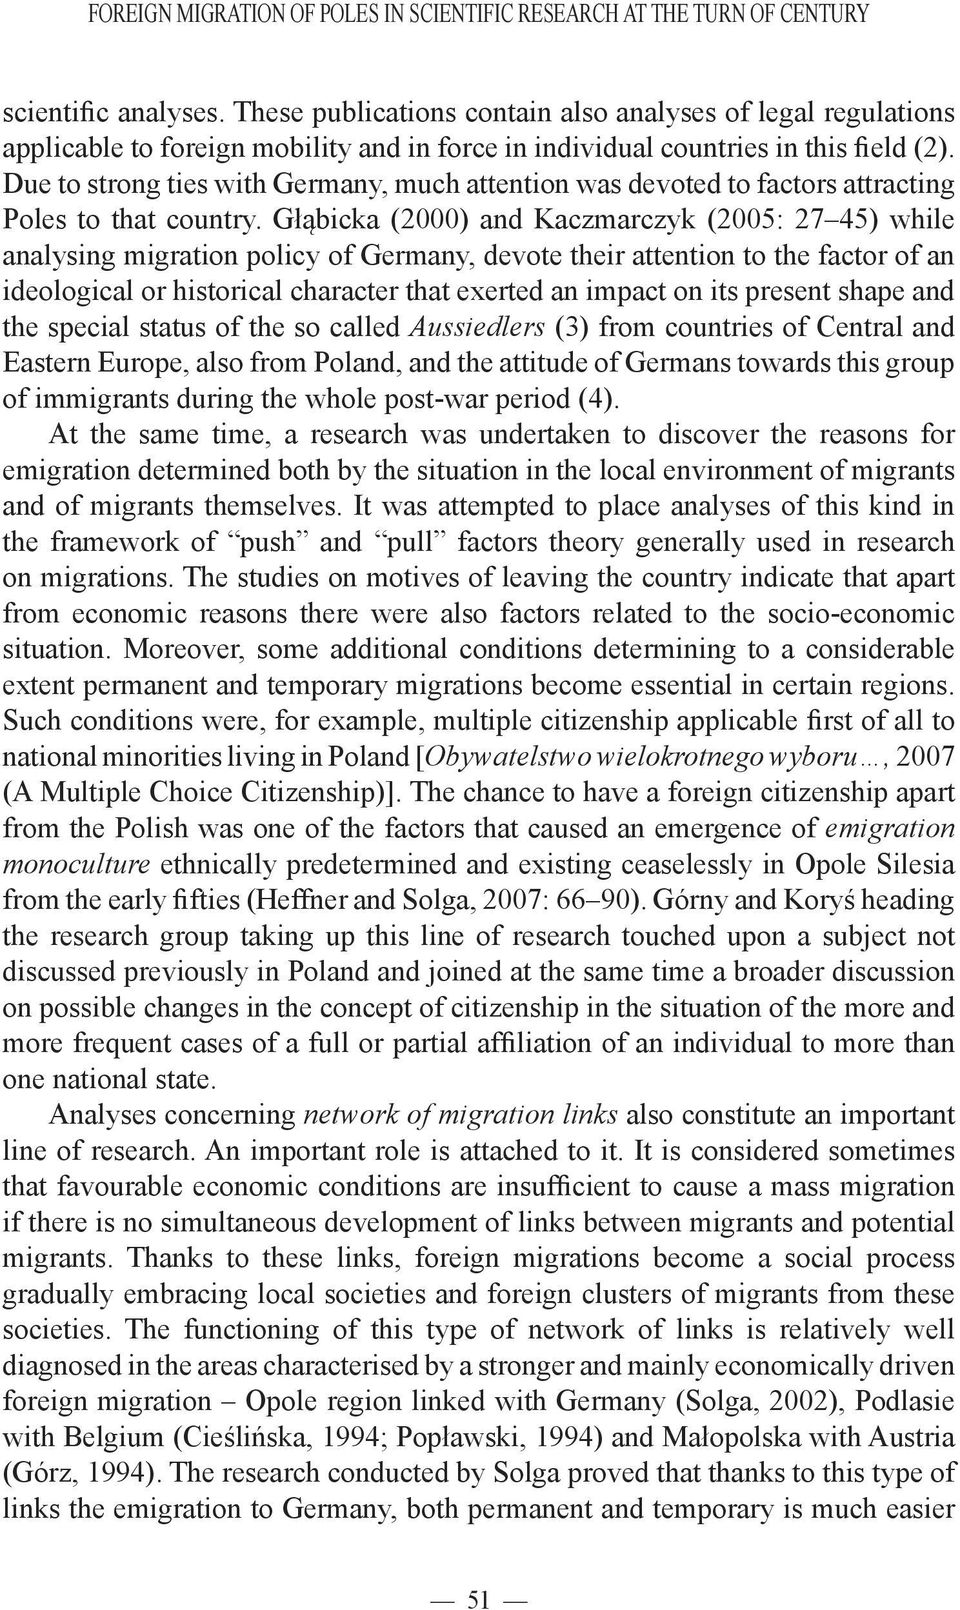 Due to strong ties with Germany, much attention was devoted to factors attracting Poles to that country.